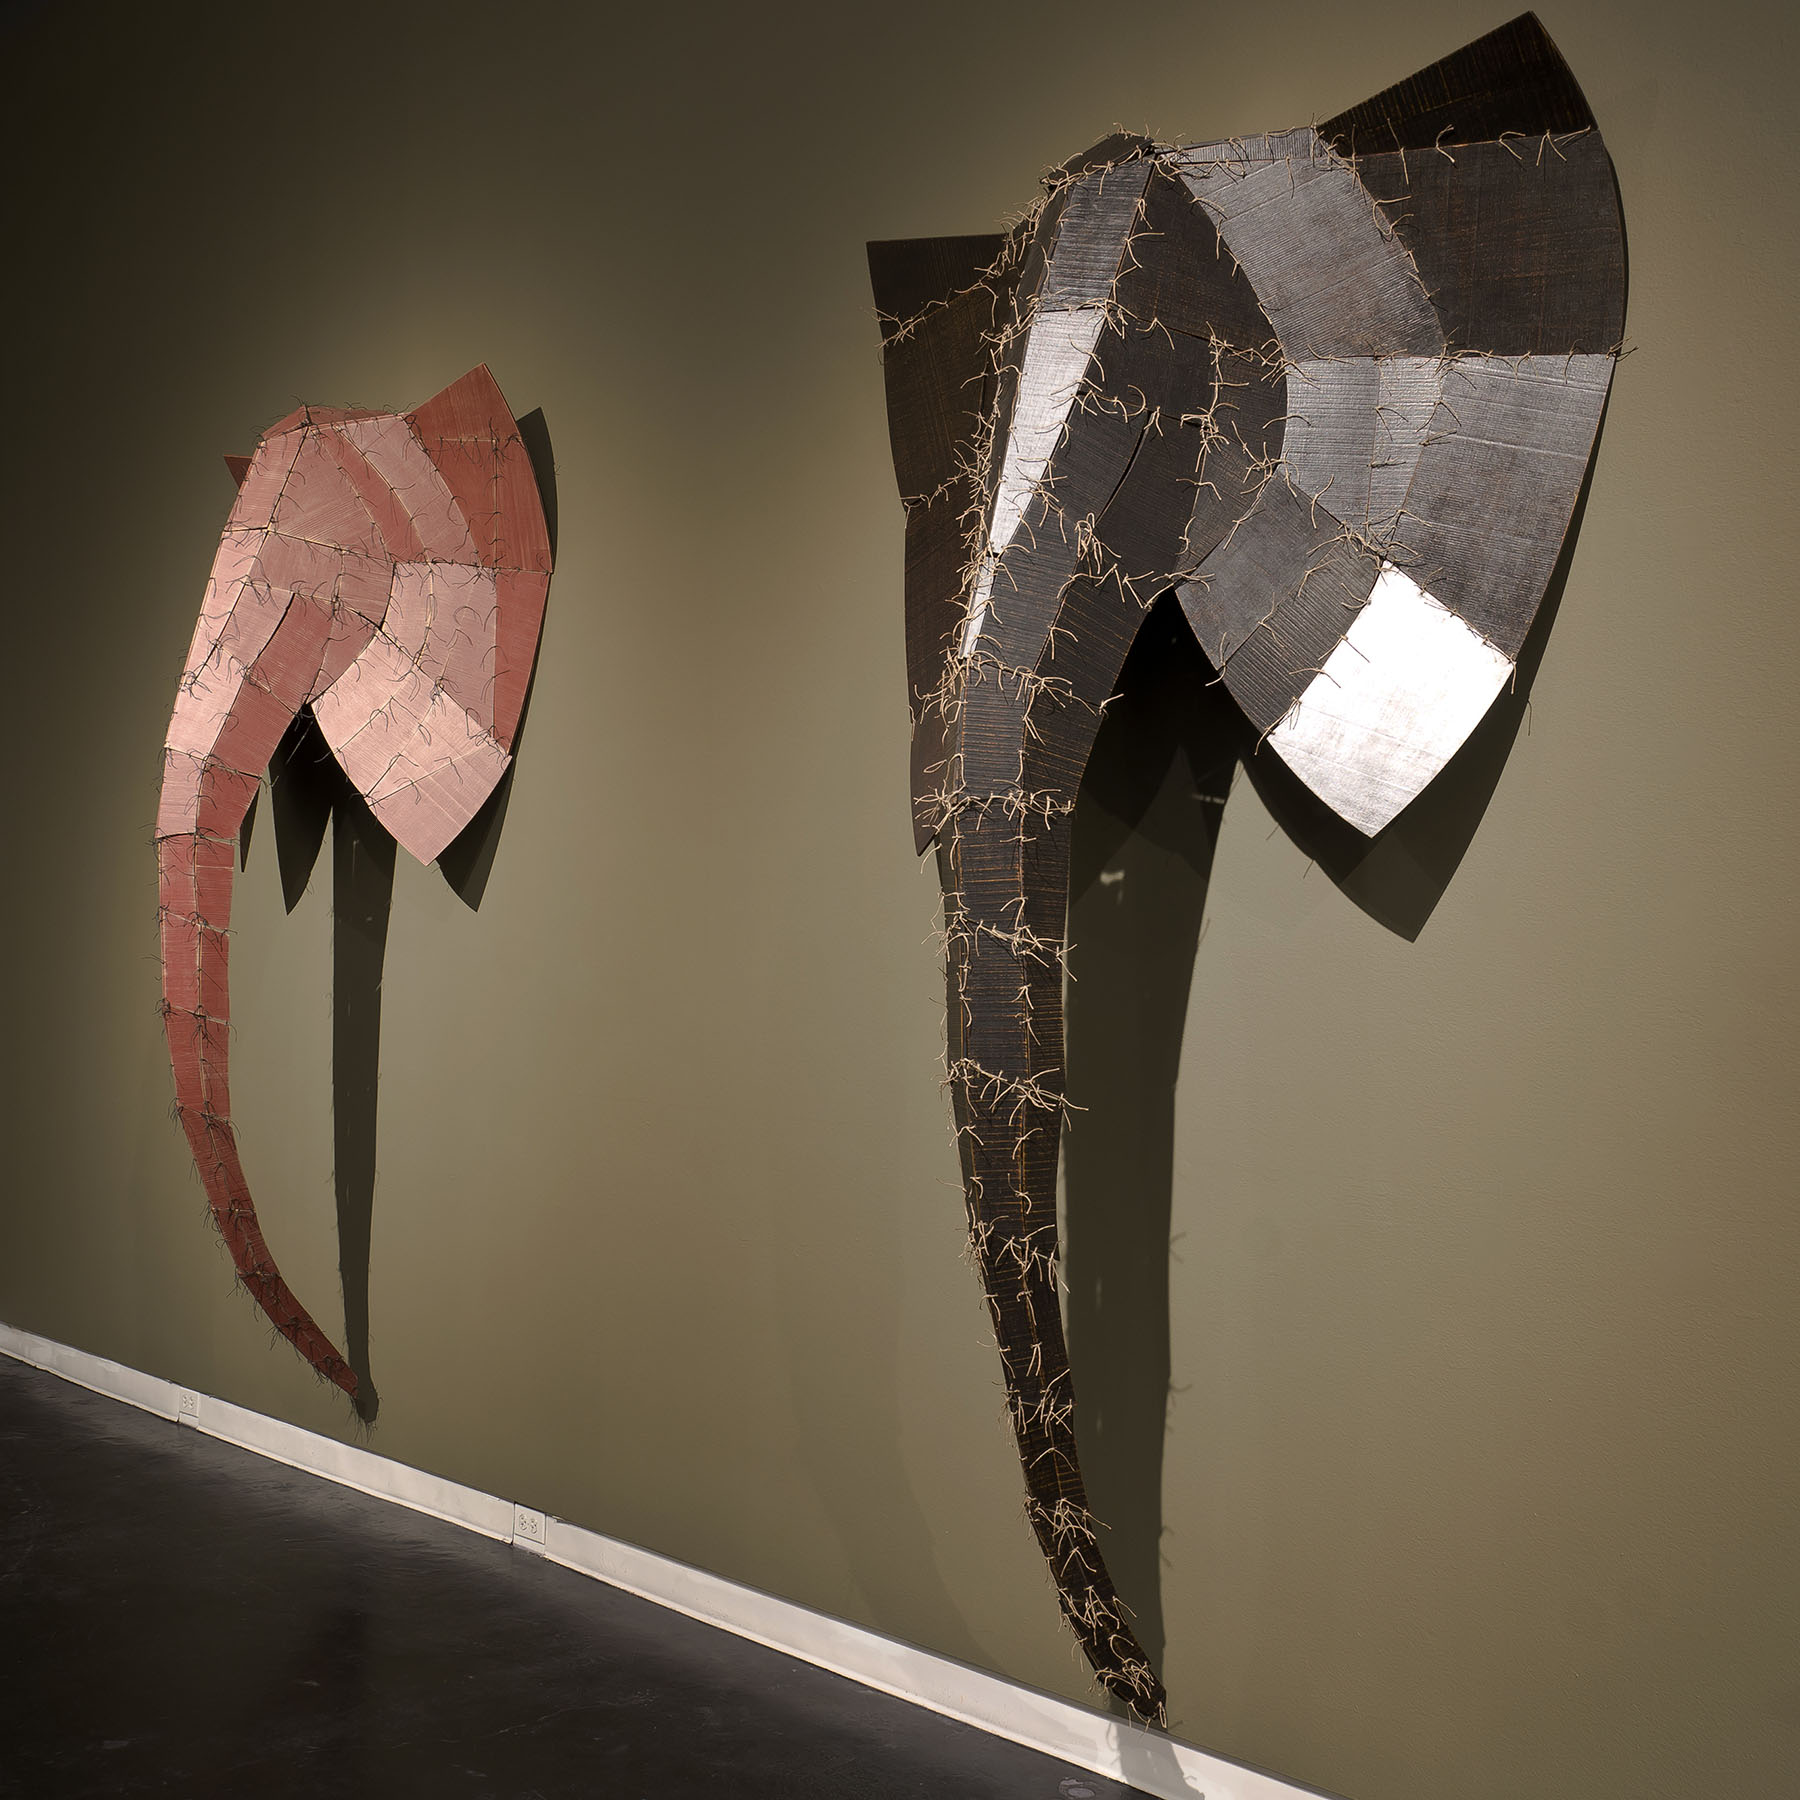 Wendy Maruyama, The WildLIFE Project: Sonje (left) (2013) and Lekuta (right) (2014)(Installation view). Wood, string, paint. Dimensions: Sonje 100” l x 50” w x 24”d; Lekuta 100” l x 50” w x 30” d. © Wendy Maruyama. Courtesy of the artist.